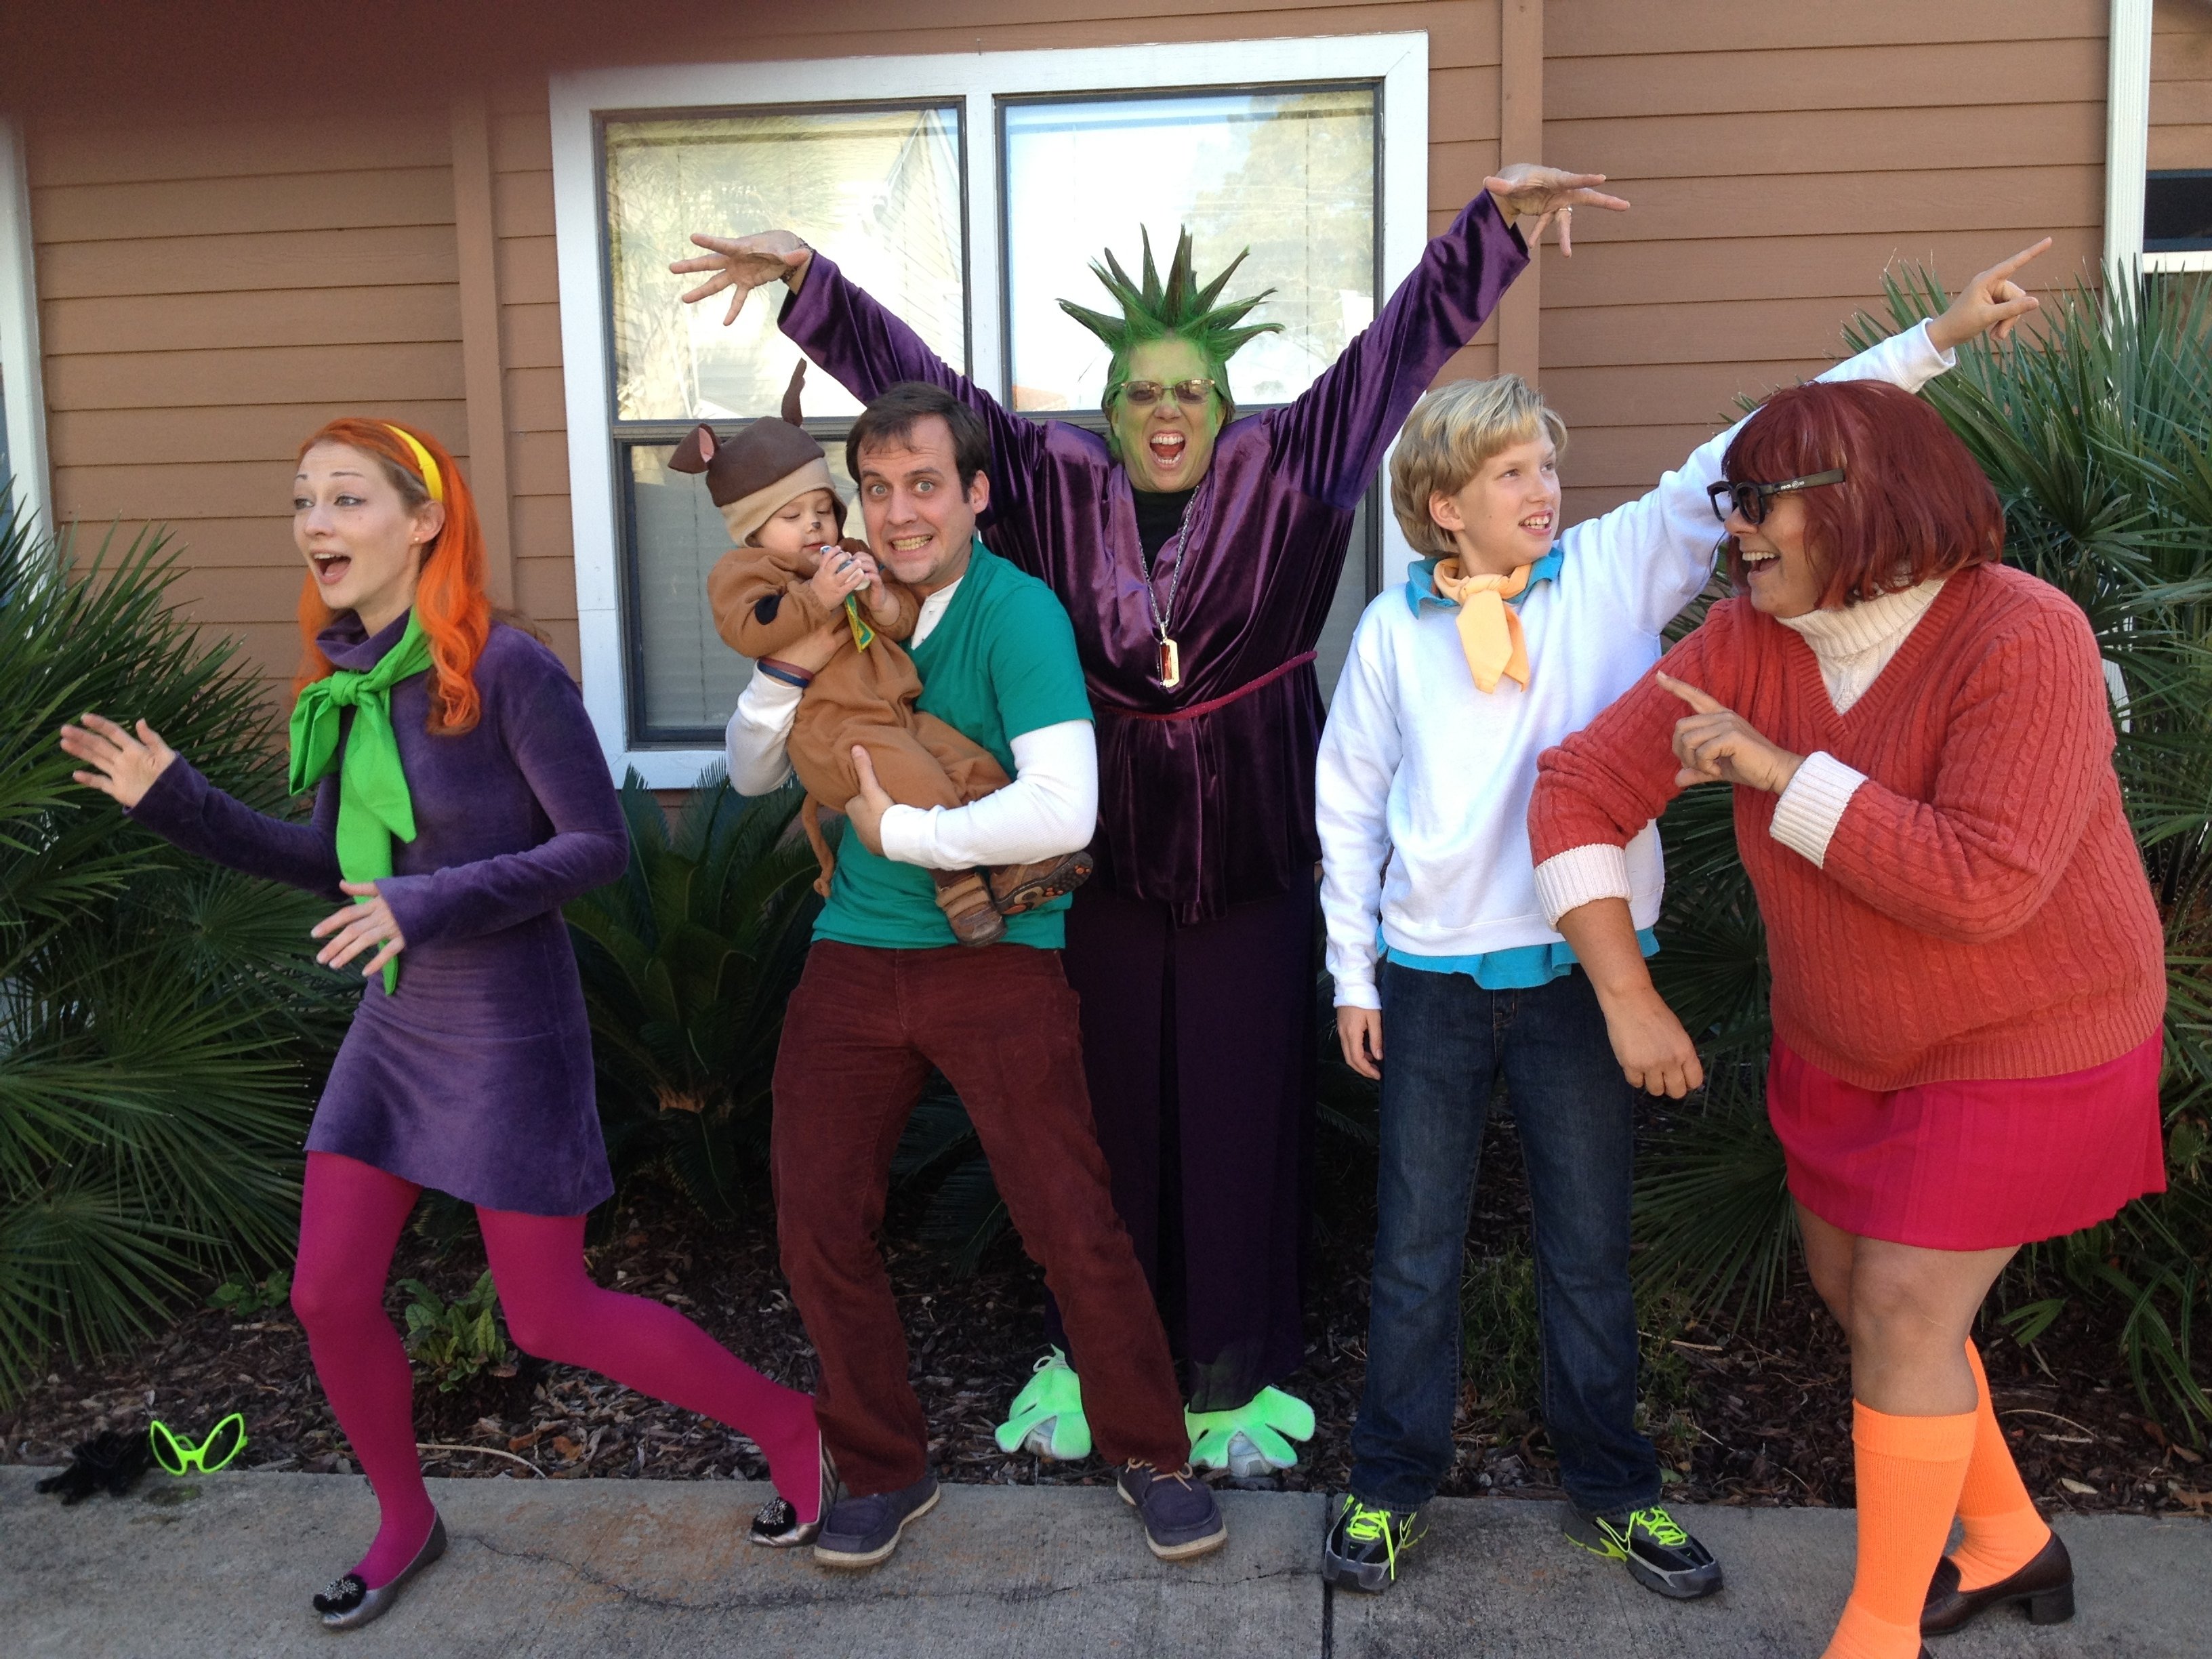 10 Attractive Halloween Costume Ideas For Groups Of 5 scooby doo and the gang family halloween costume toddler group 2022